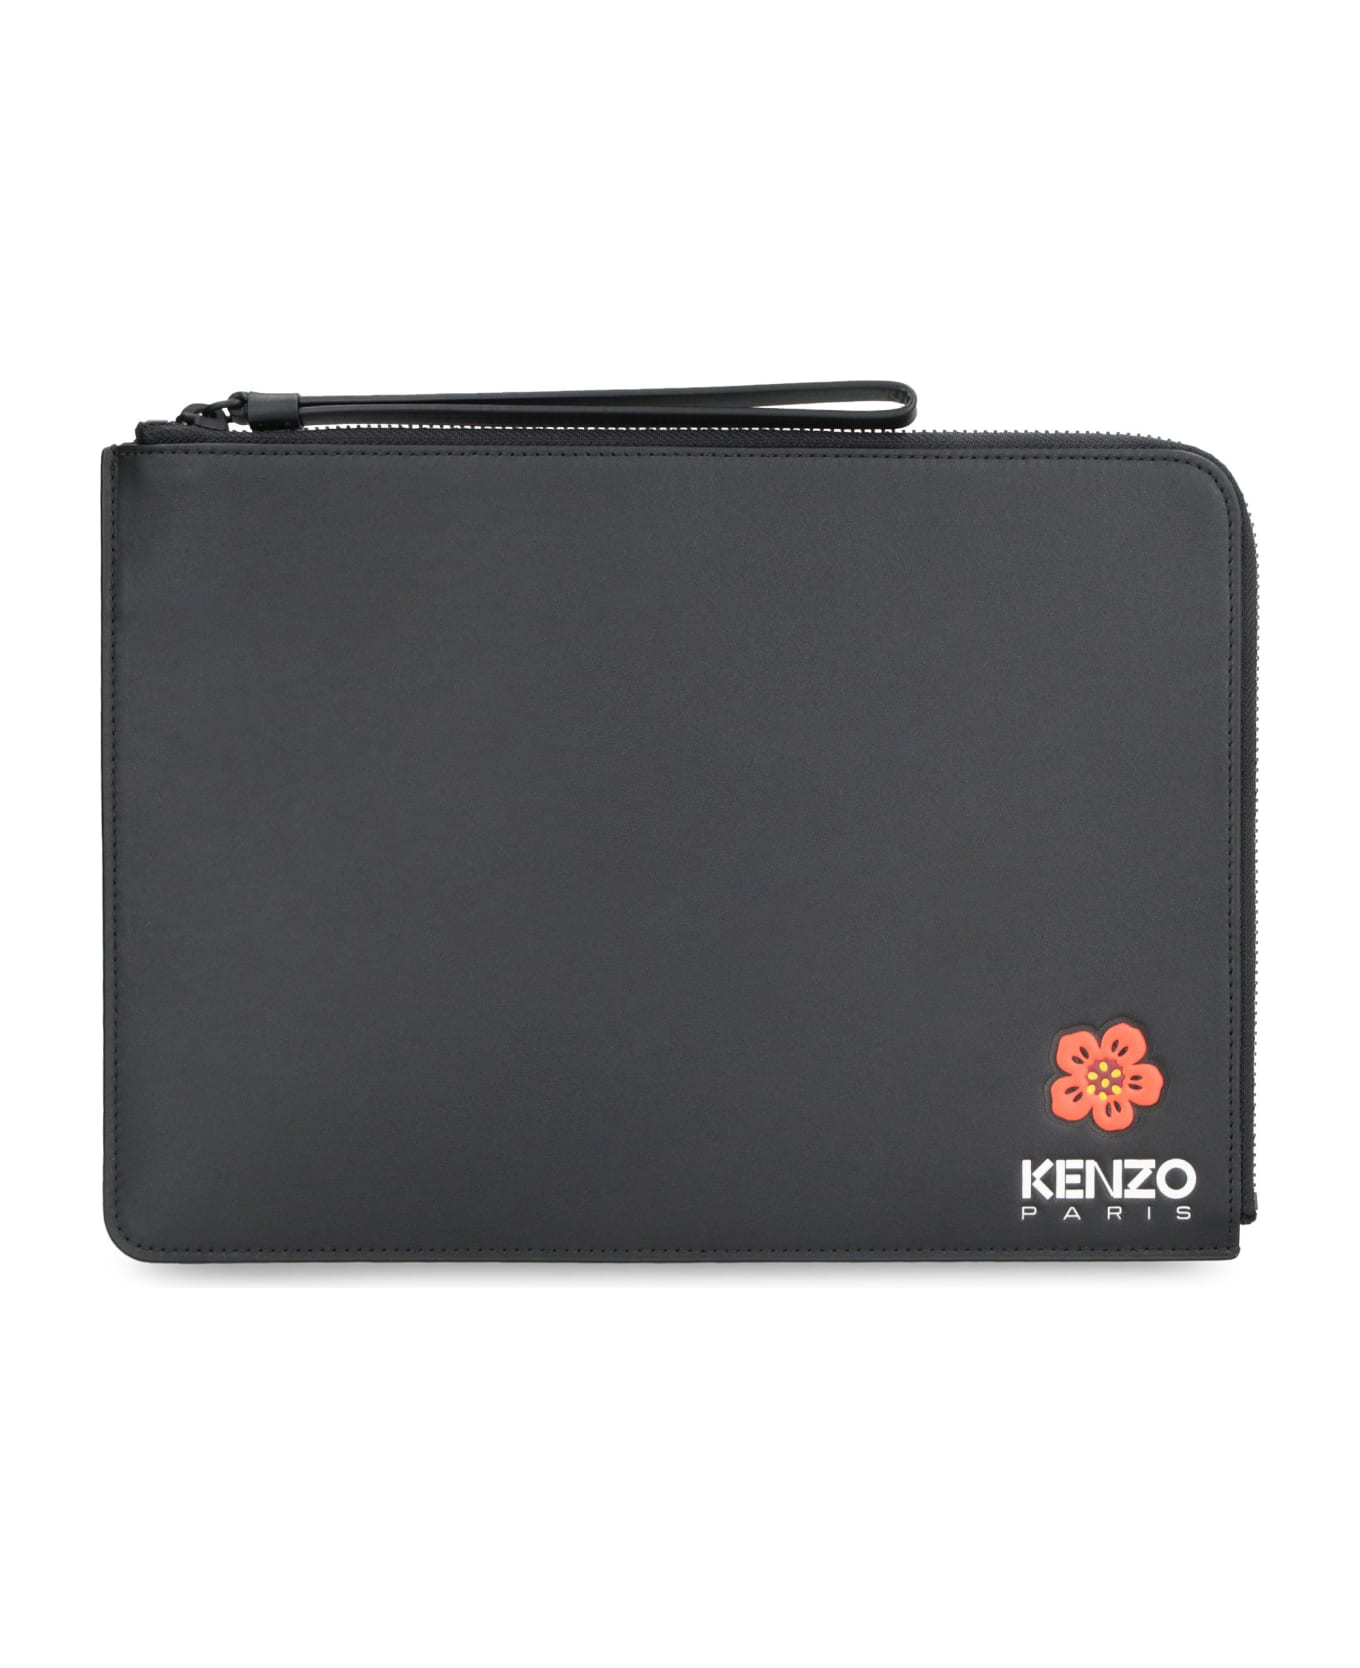 Kenzo Leather Flat Pouch - black